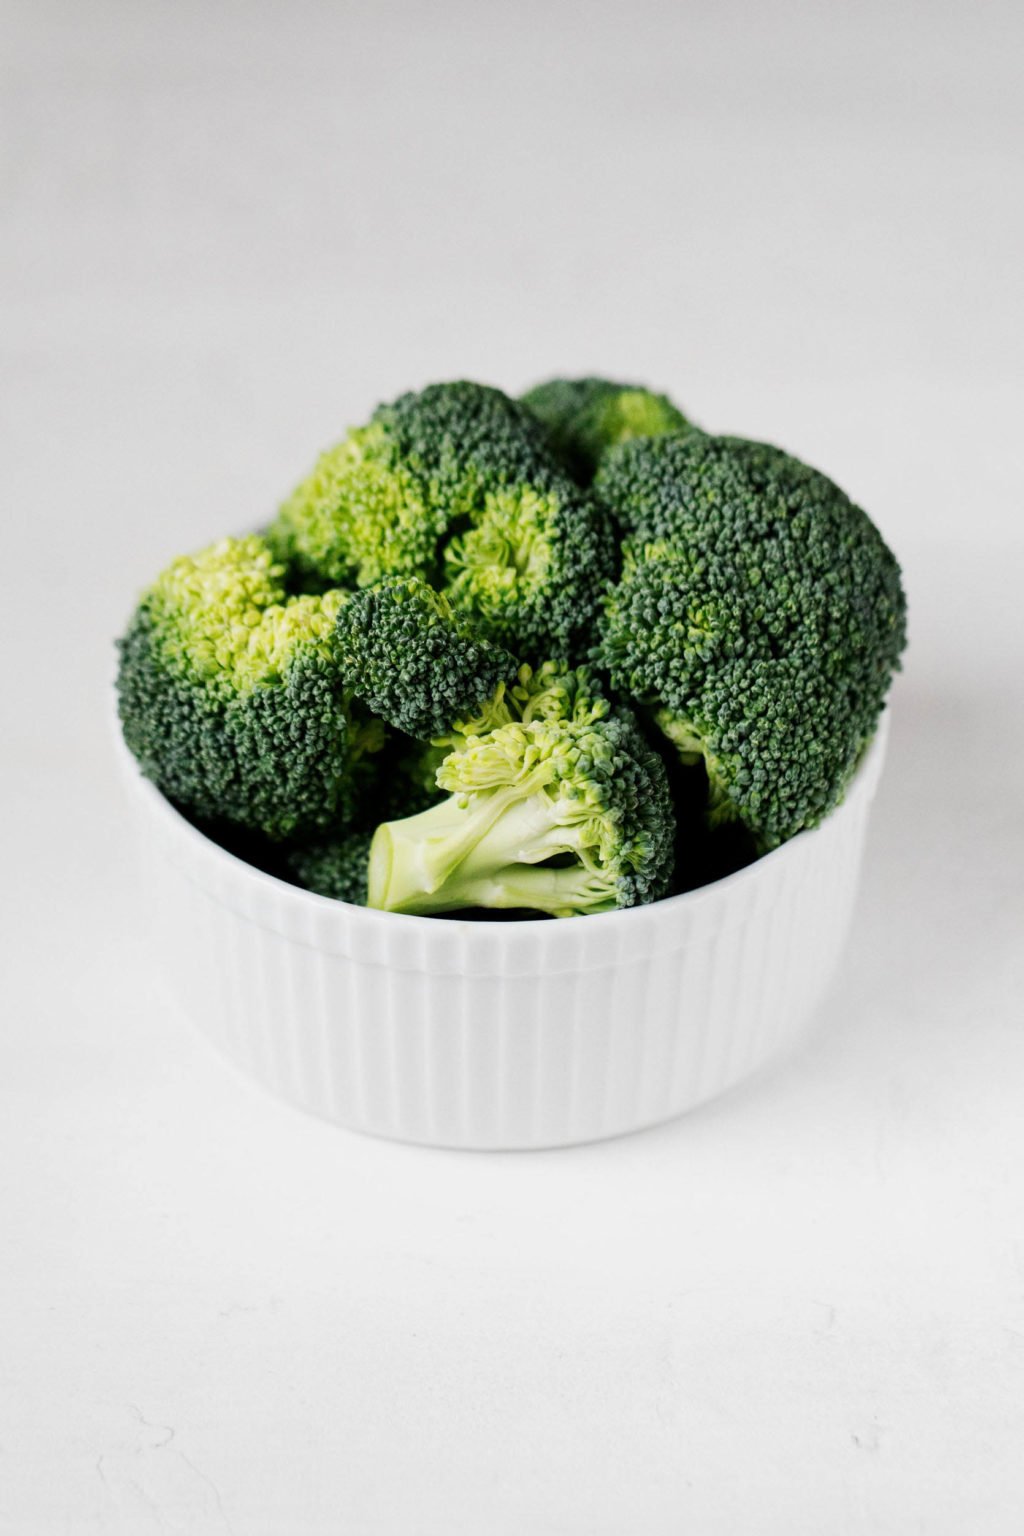 A small white ramekin is filled with raw broccoli florets.